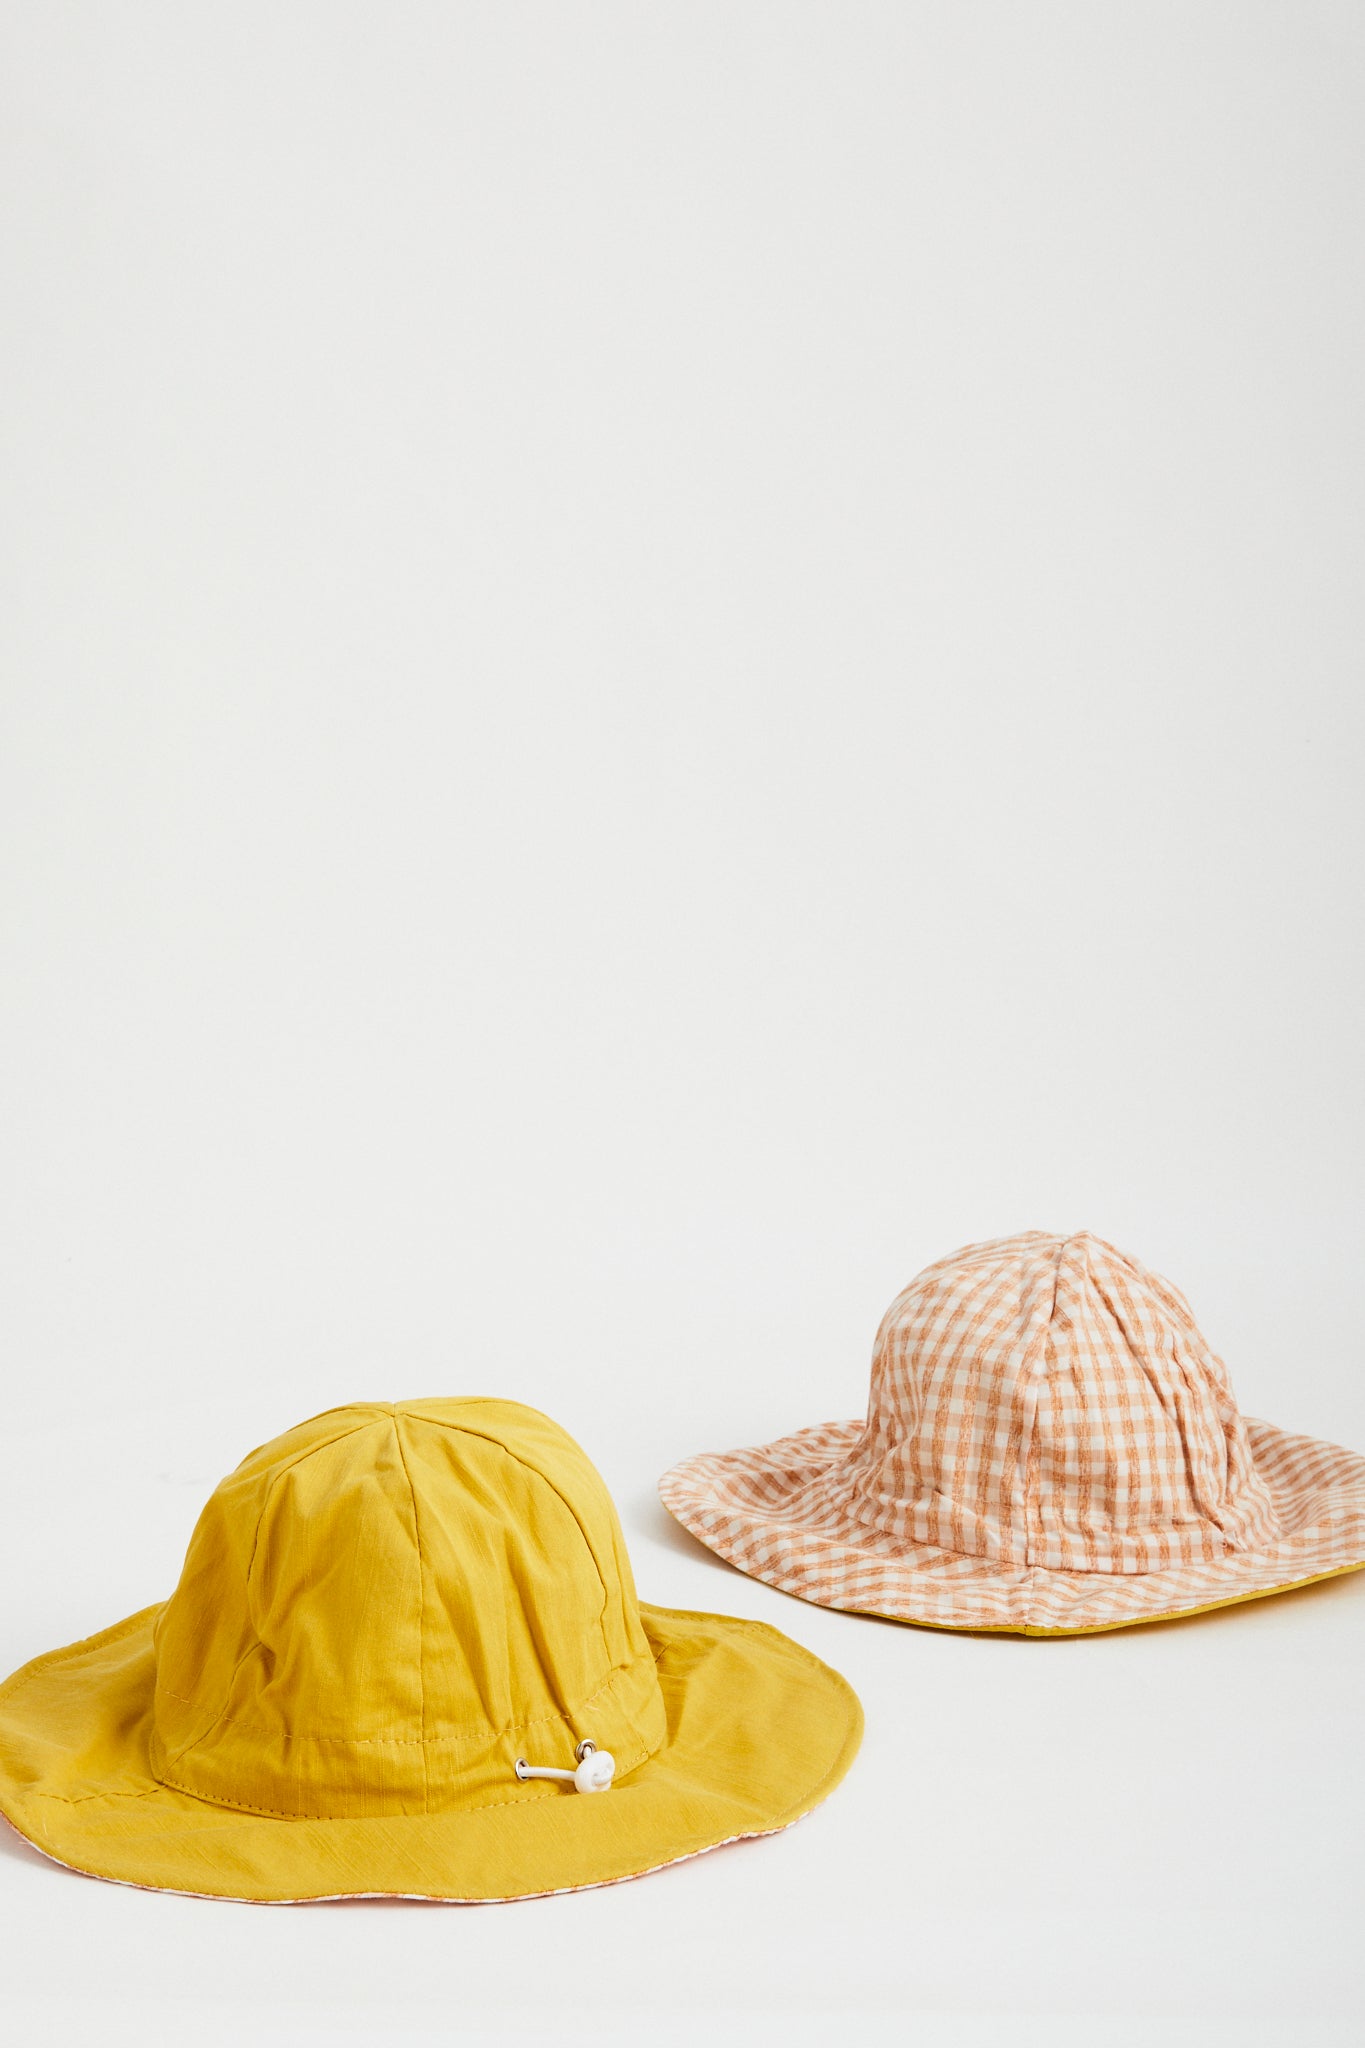 Sunshine Gingham reversible sun hat. Drawstring toggle and wire brim.